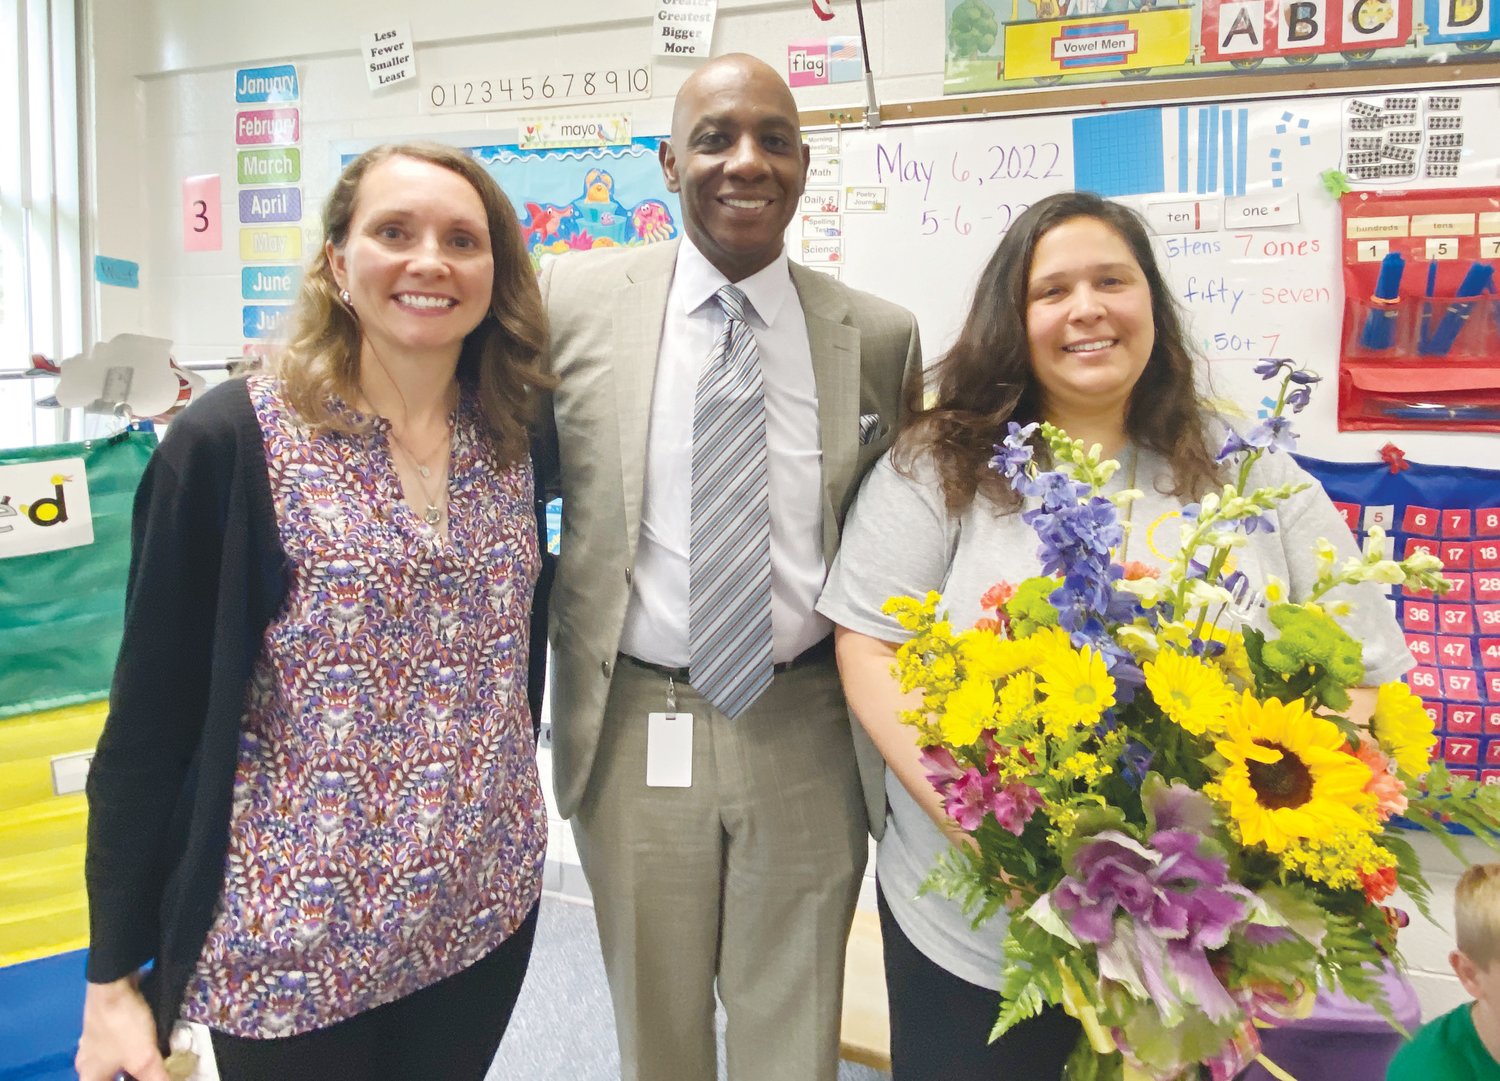 Superintendent Dr. Anthony Jackson (center) and North Chatham Elementary School Principal Dr. Janice Giles (left) congratulate Nanette Atkinson on her selection as the Chatham County Schools Instructional Assistant of the Year last Friday.